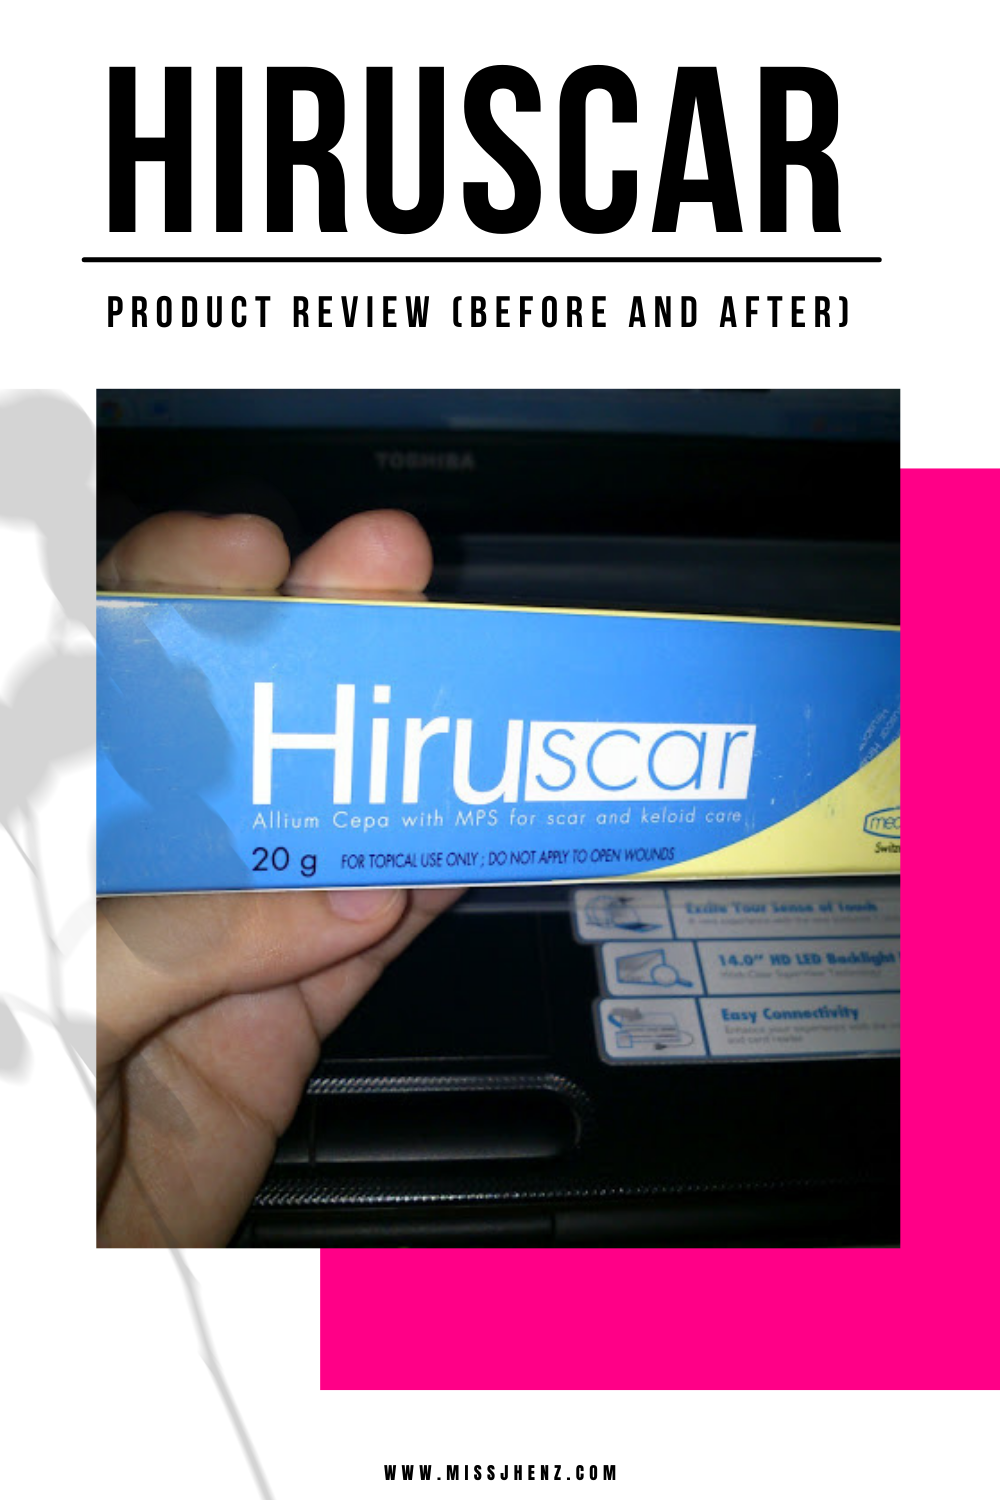 Hiruscar Product Review (Hiruscar Before And After)